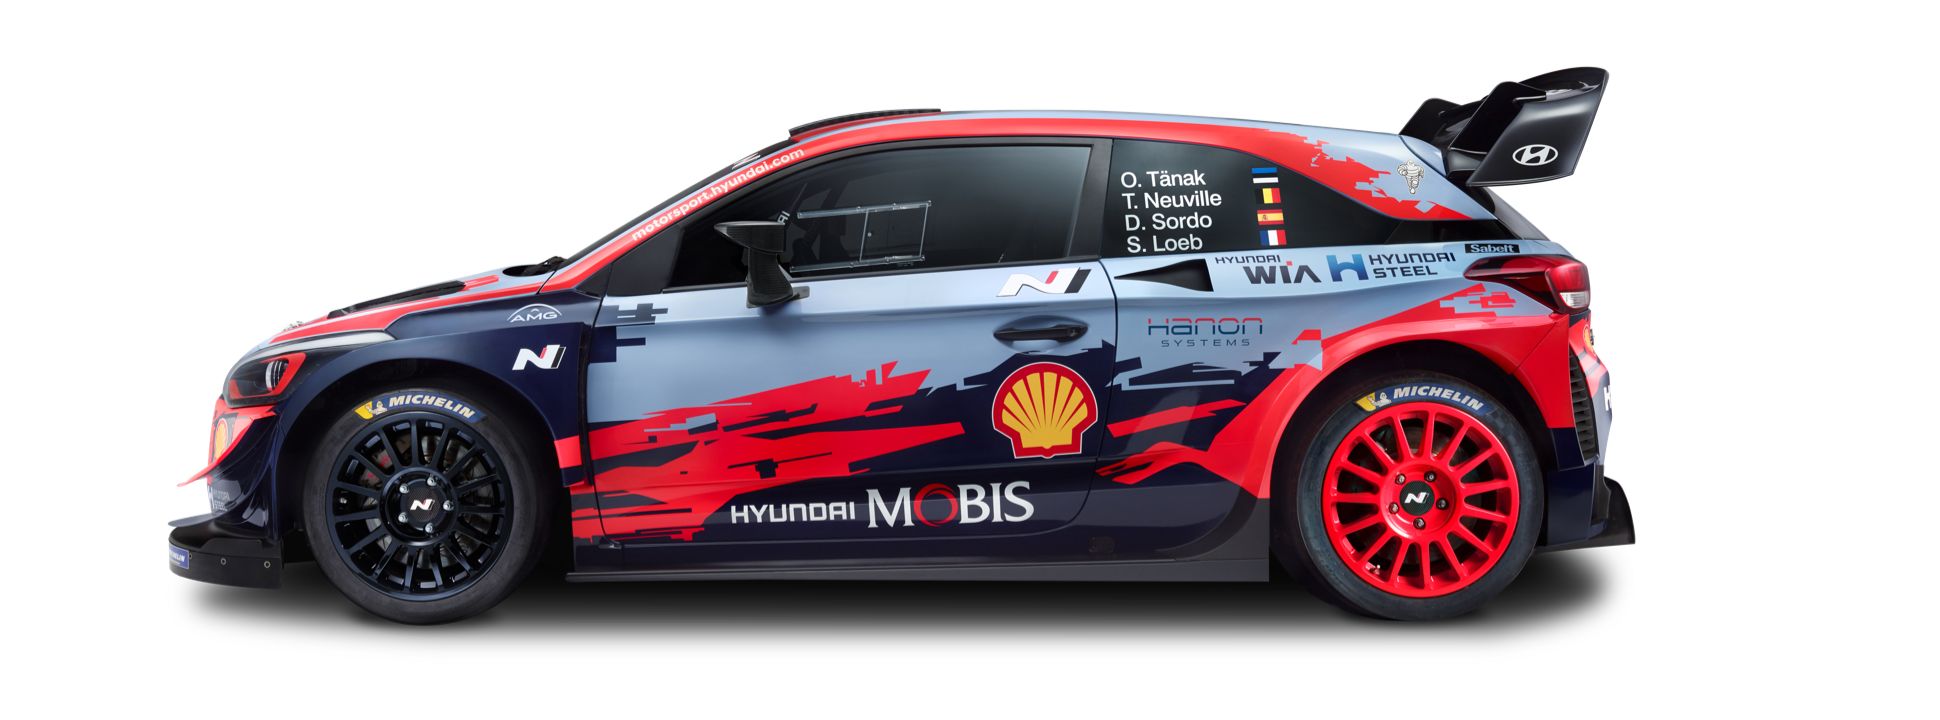 Hyundai WRC vehicle from the side